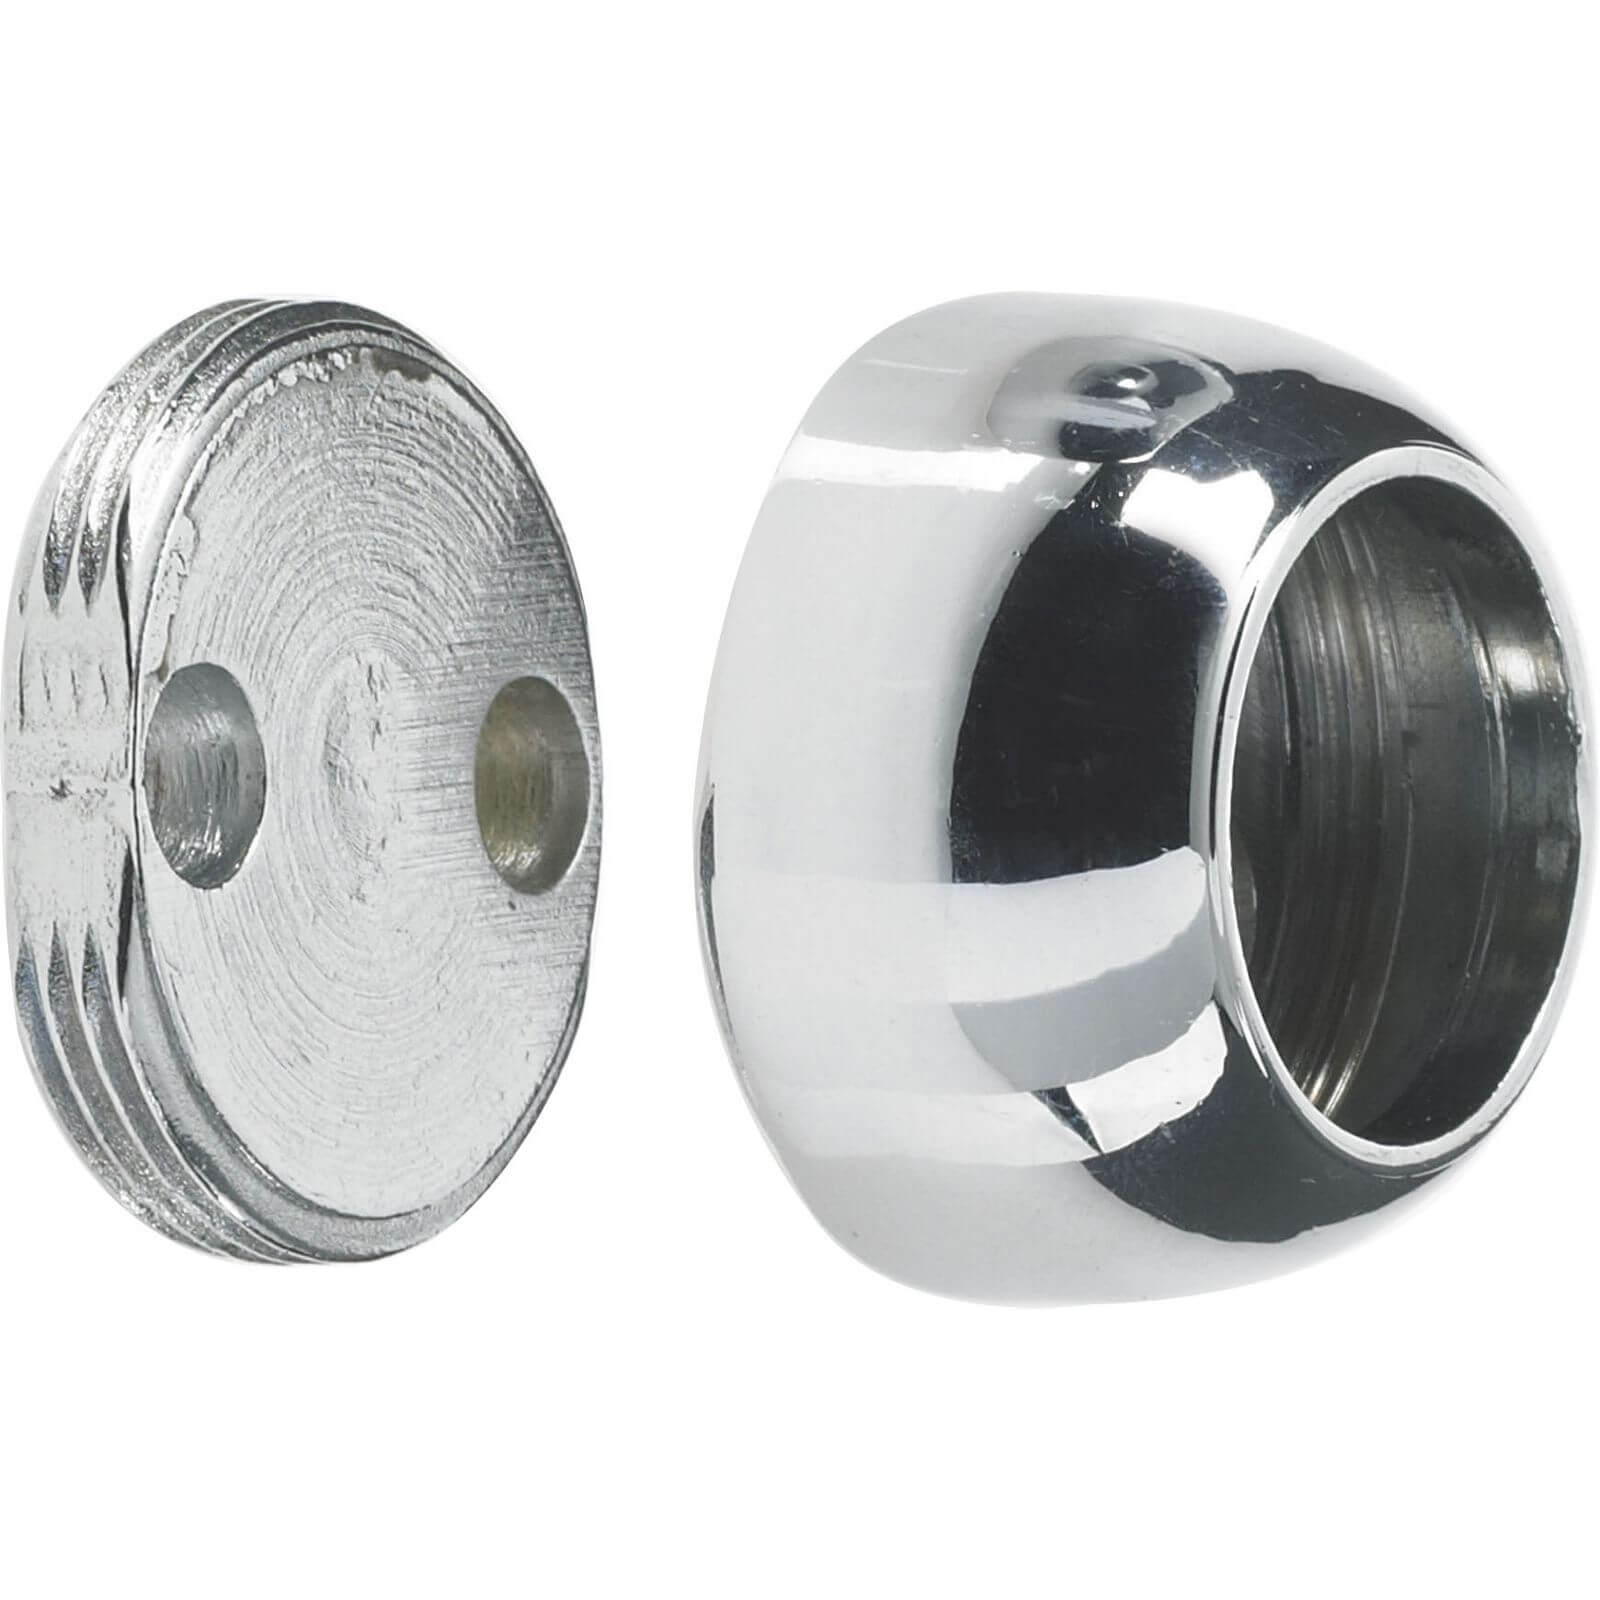 Covered Sockets - Chrome Plated - 25mm